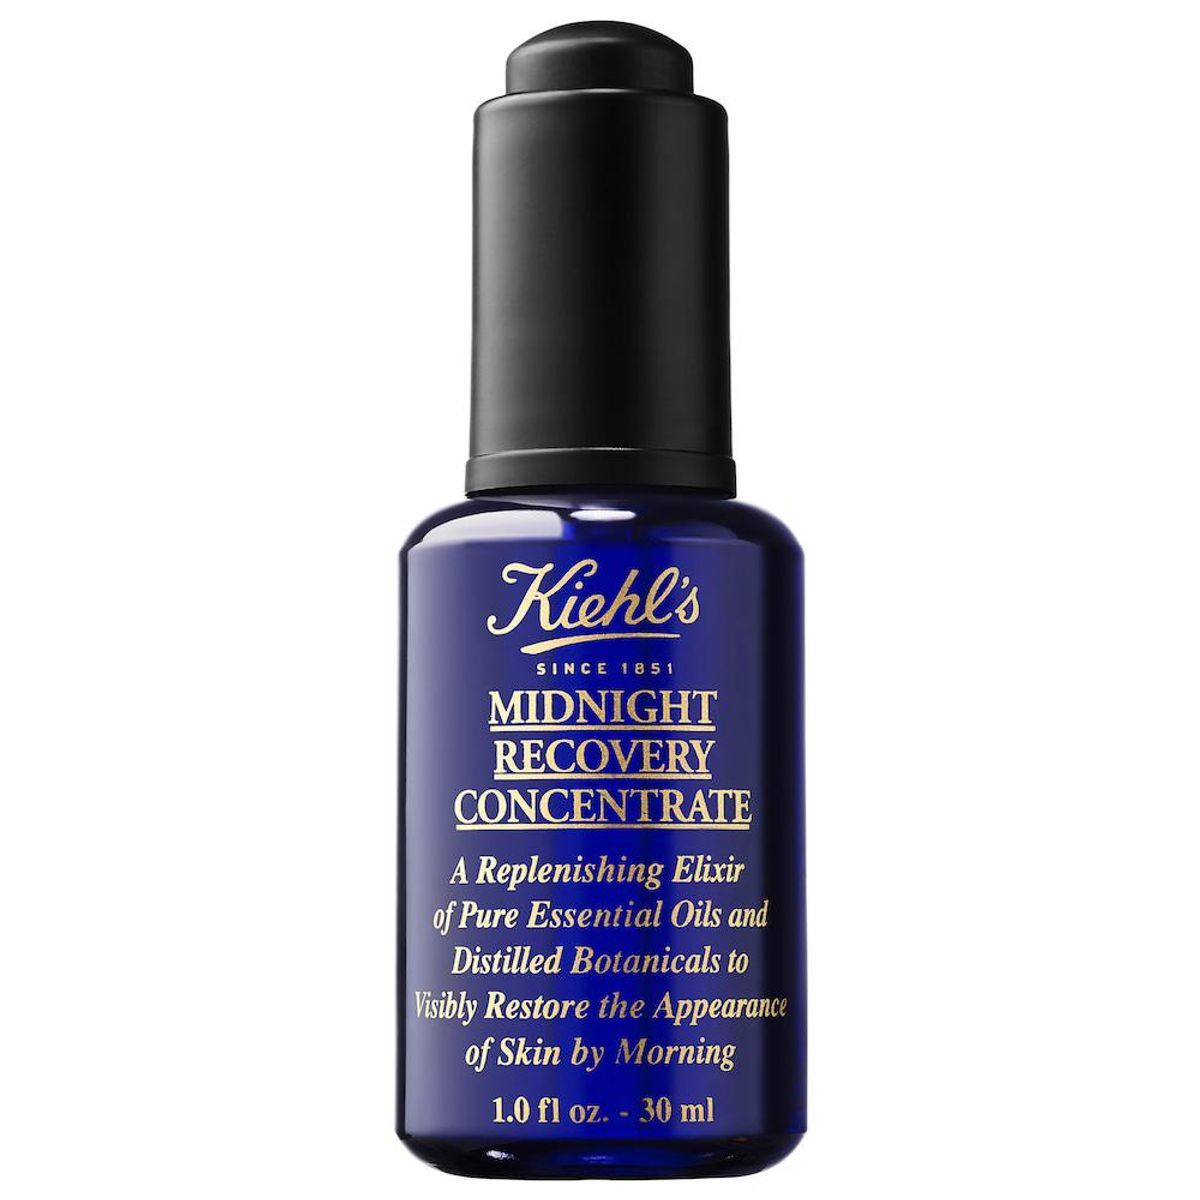 kiehls midnight recovery concentrate